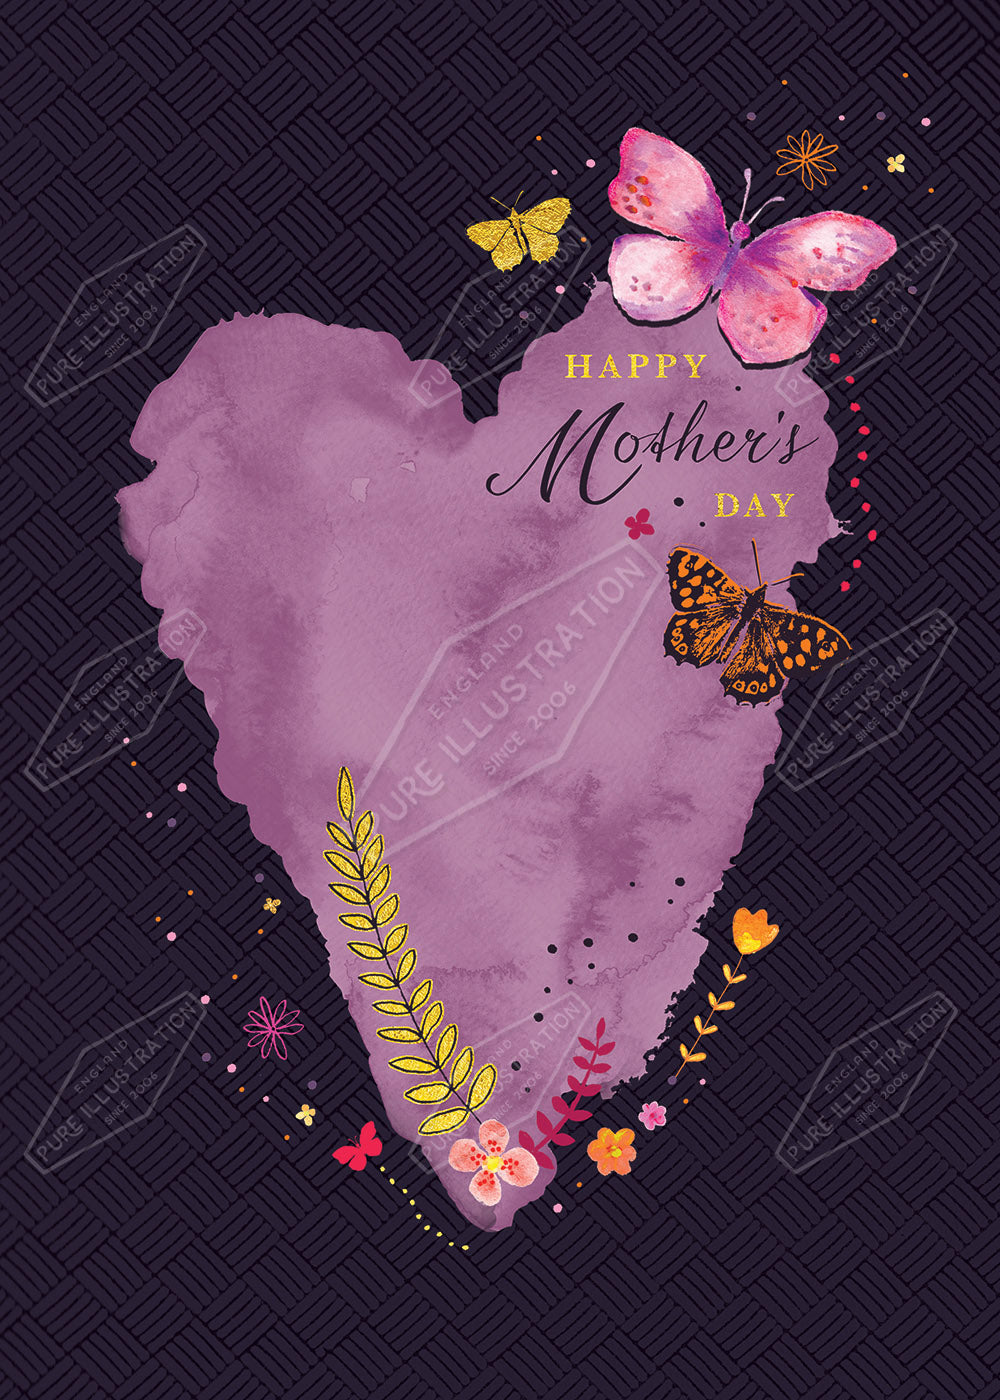 Mother's Day Heart Design by Victoria Marks for Pure Art Licensing Agency & Surface Design Studio